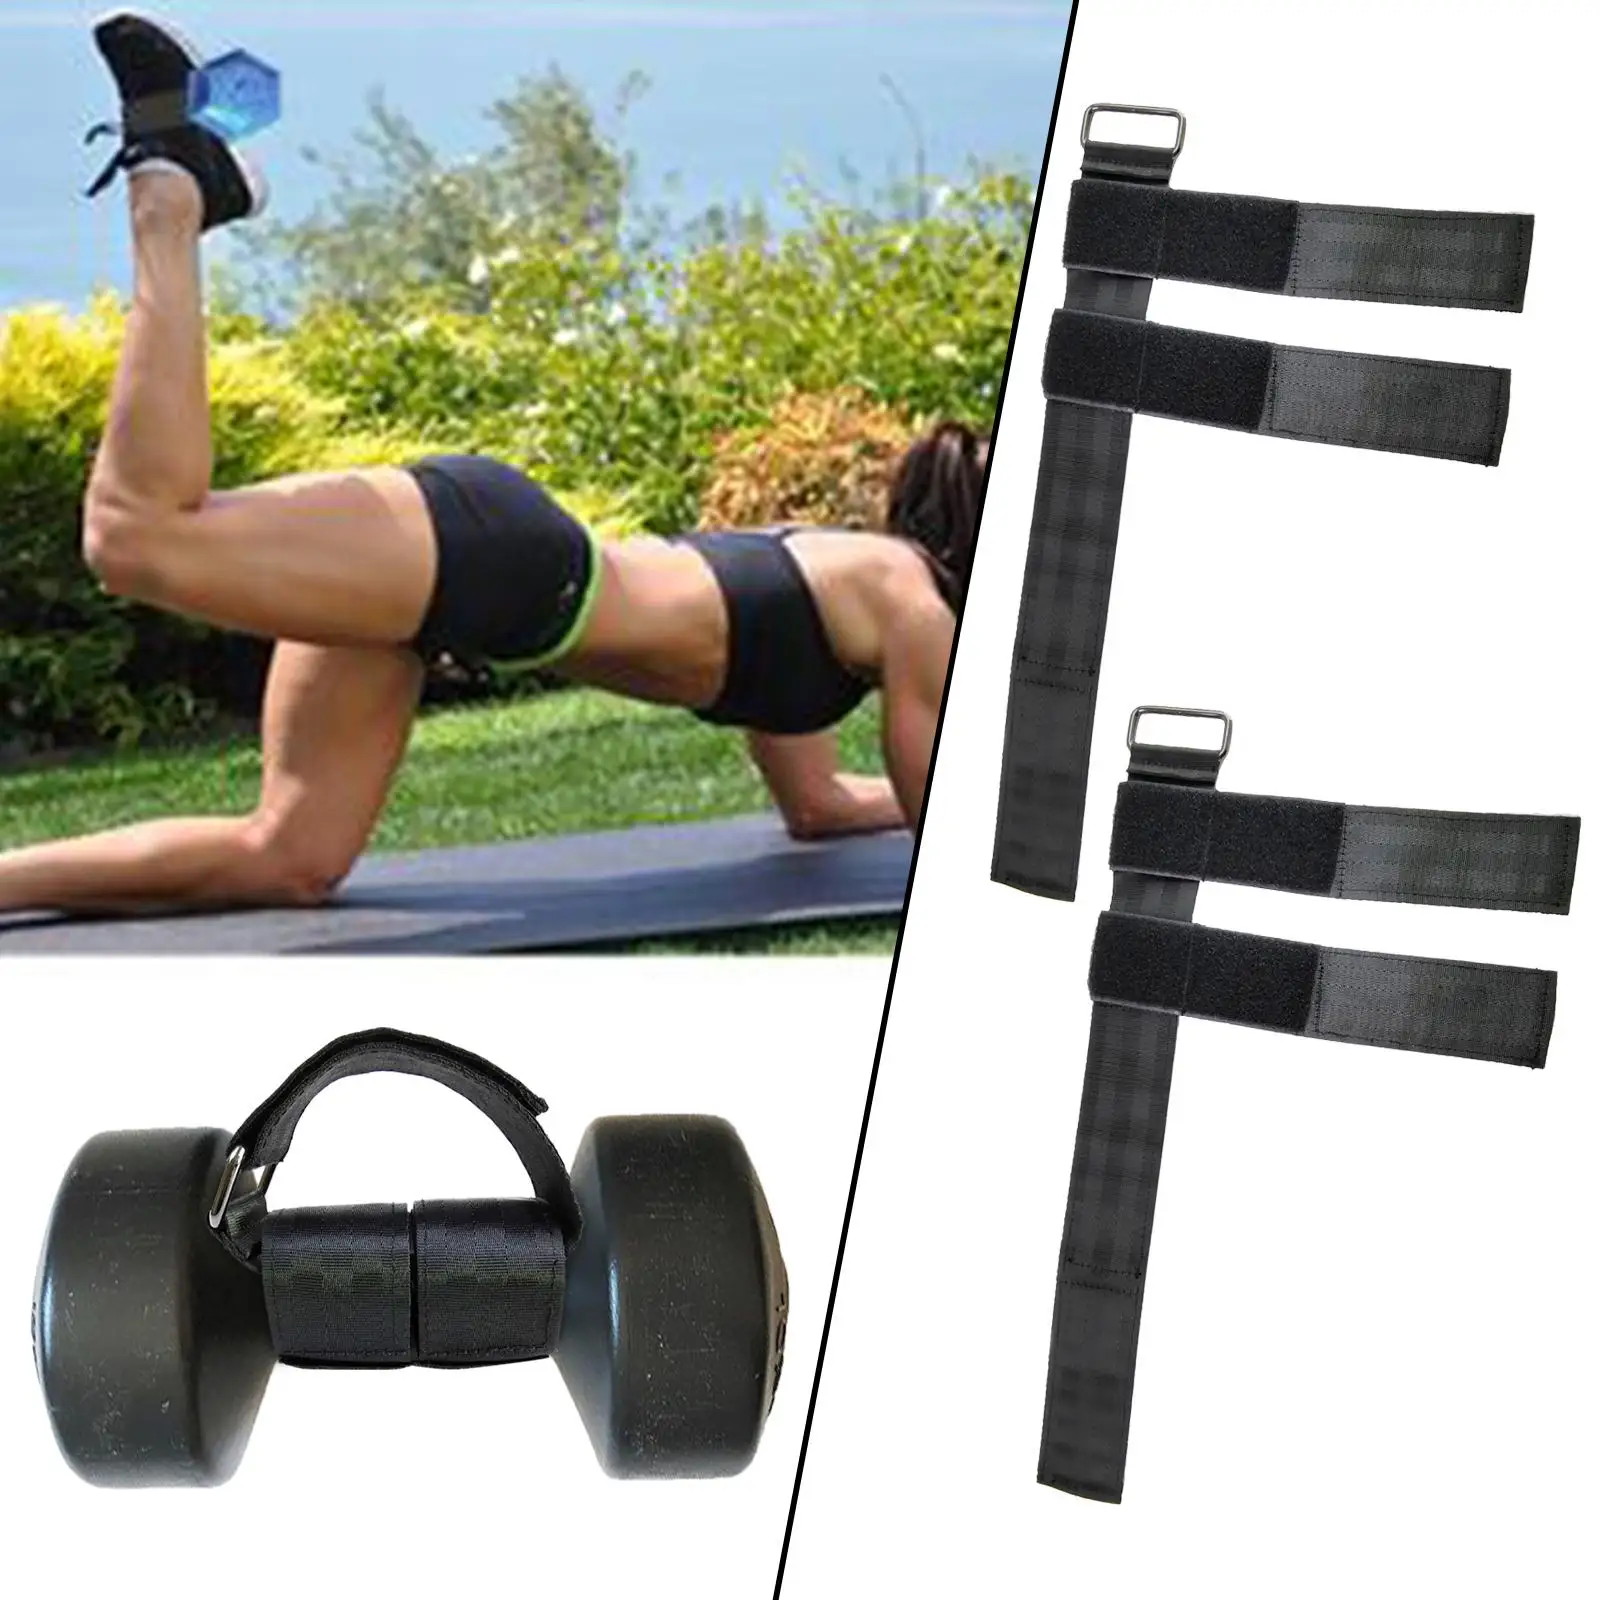 2 Pieces D Ring Ankle Anchor Belt Adjustable Leg Pulley Strap Ankle Strap for Gym Strength Training Workout Equipment